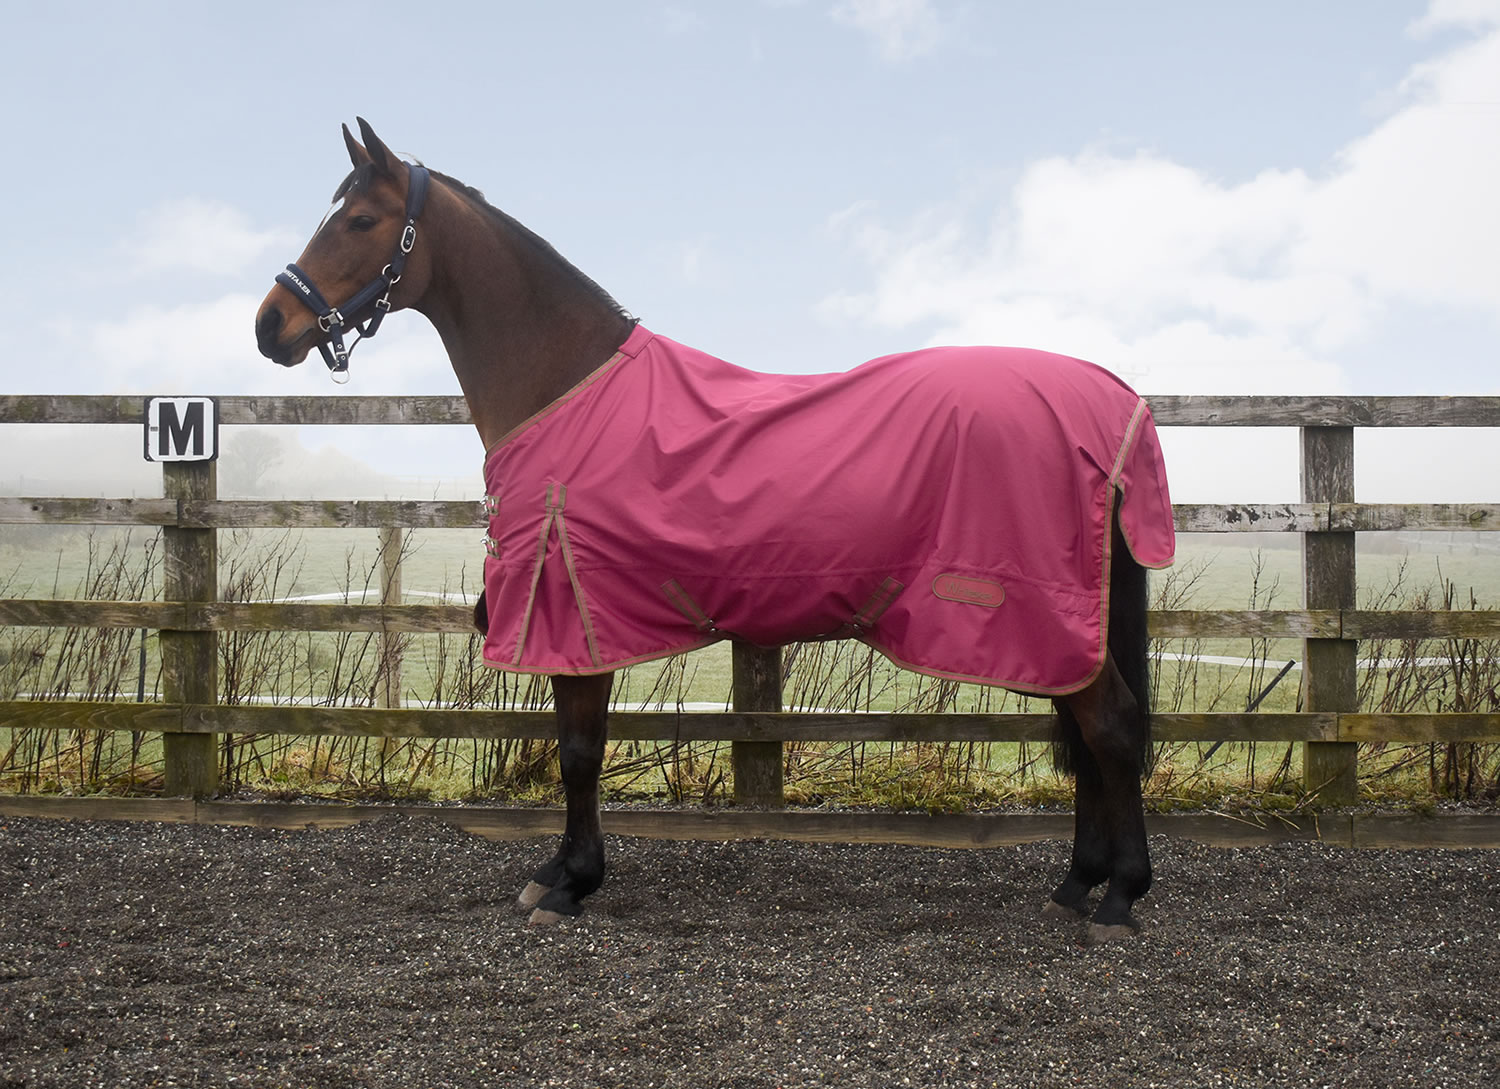 WHITAKER TURNOUT RUG EXLEY 0GM PLUM  5' 6'' TURNOUT RUG